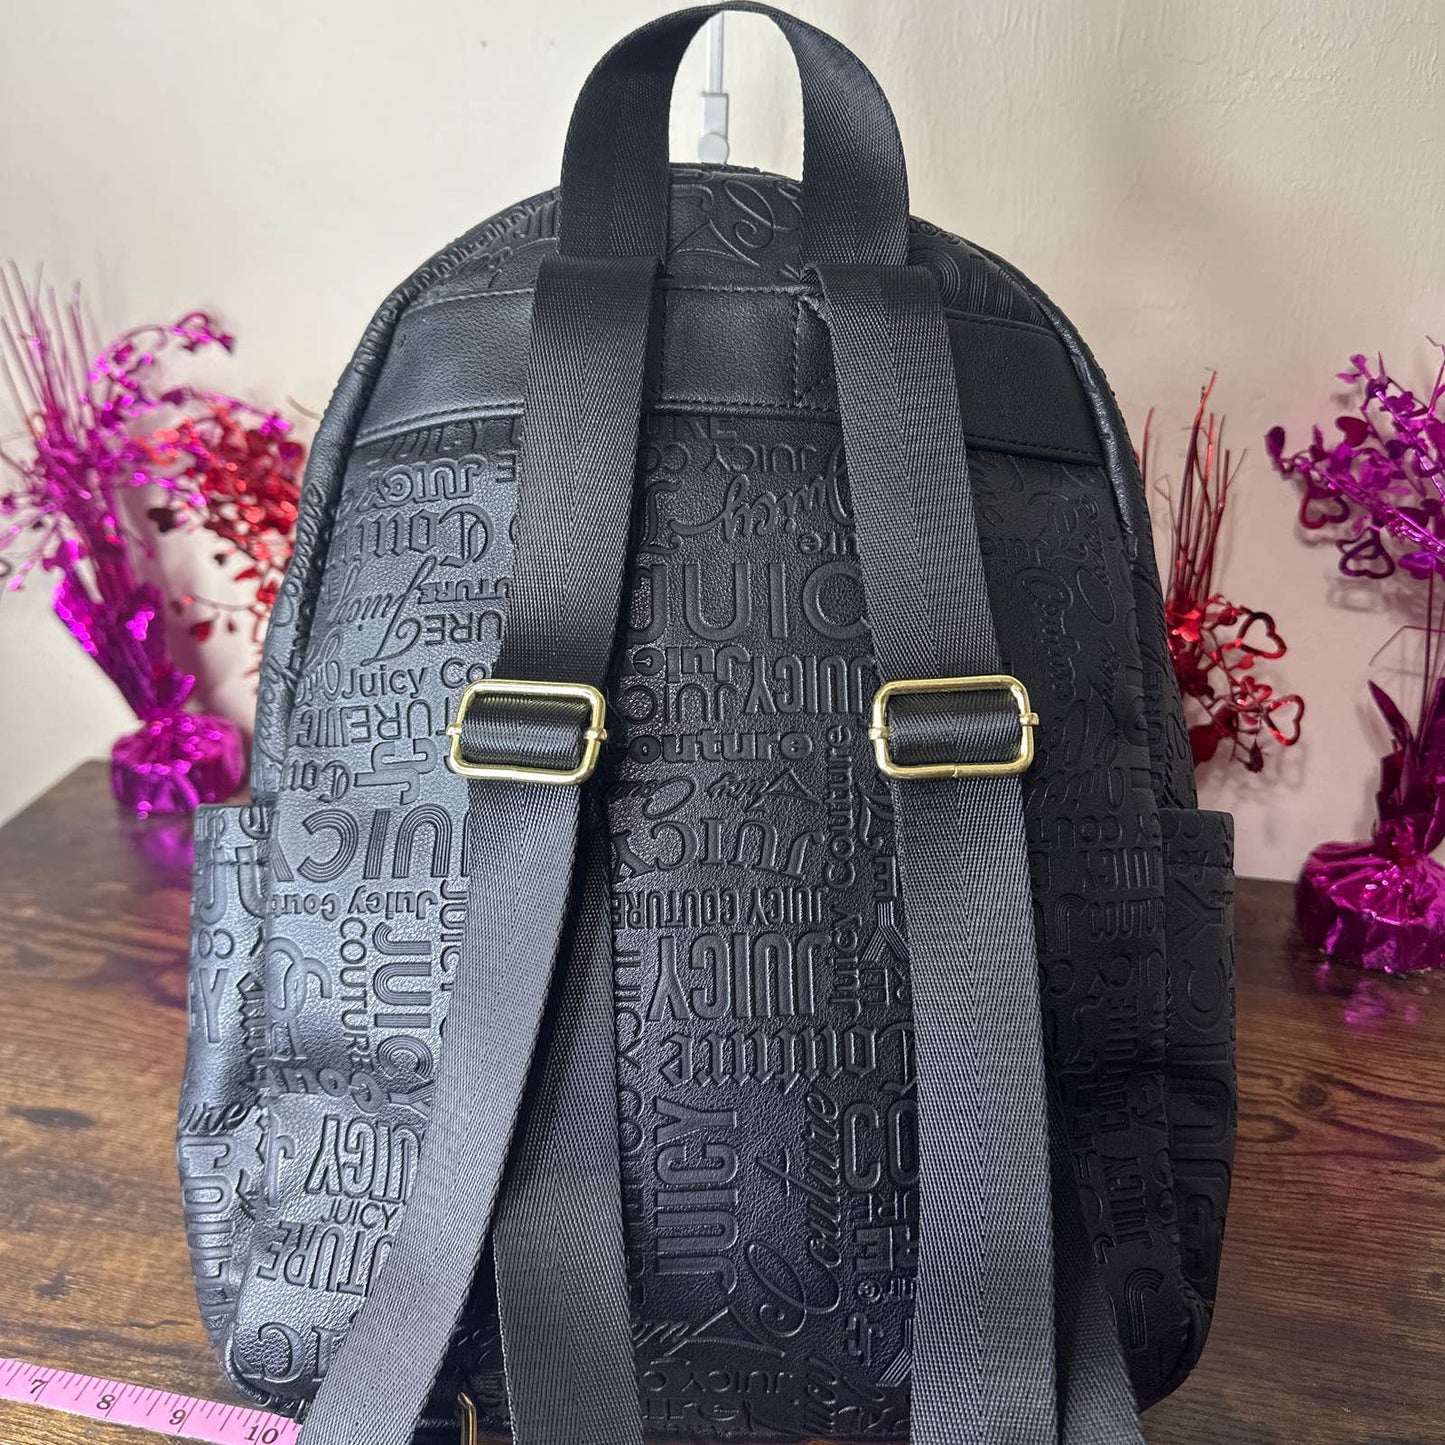 Juicy Couture Word Play Backpack Licorice